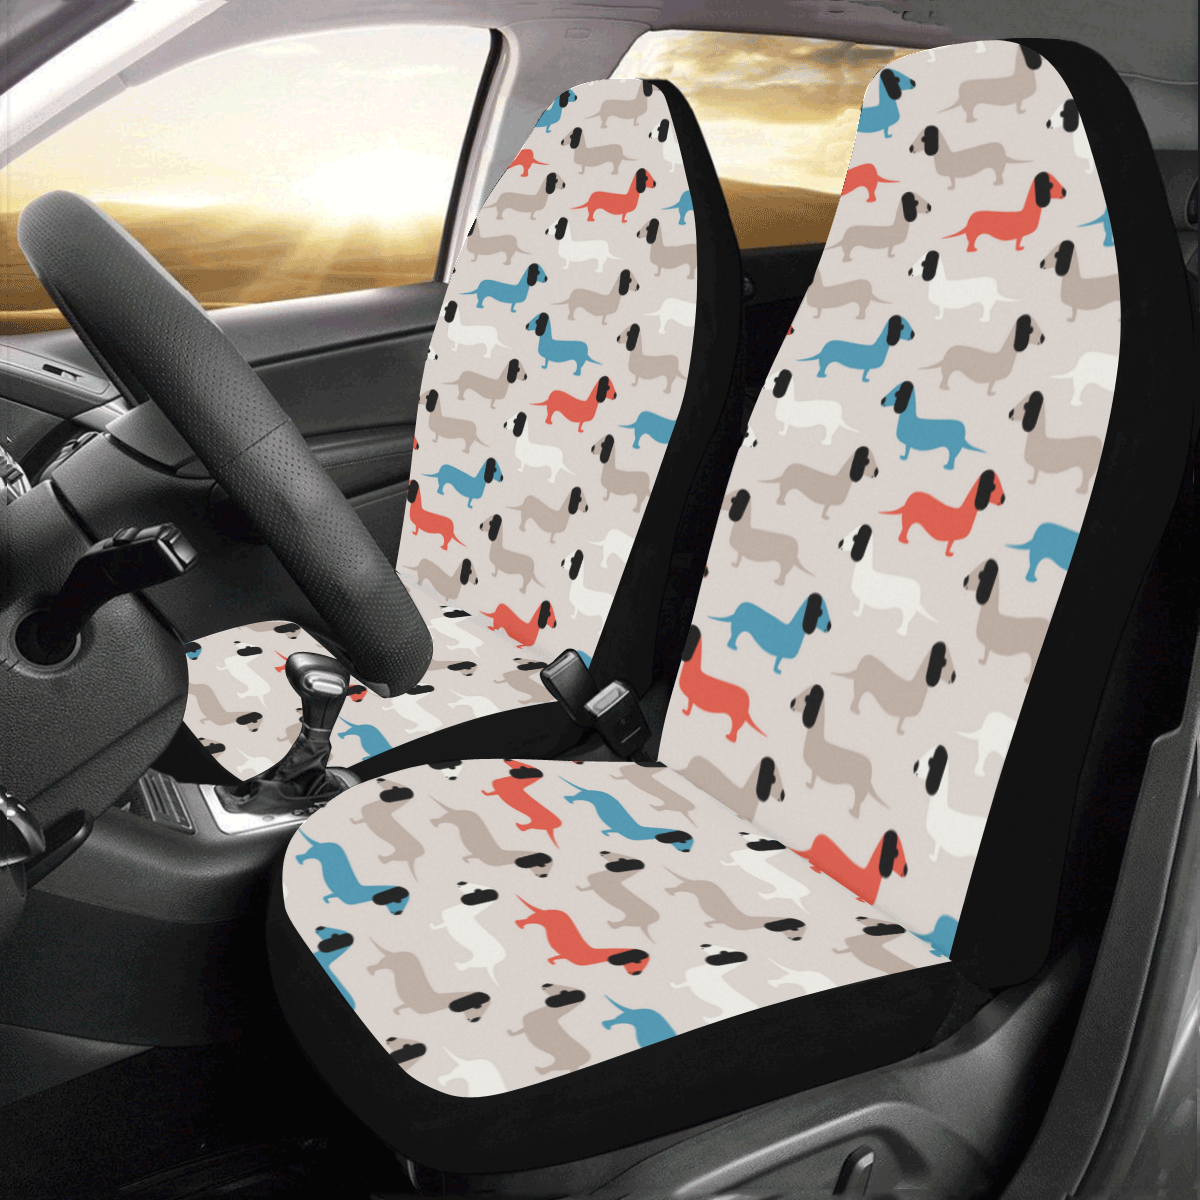 dogs Car Seat Covers (Set of 2)